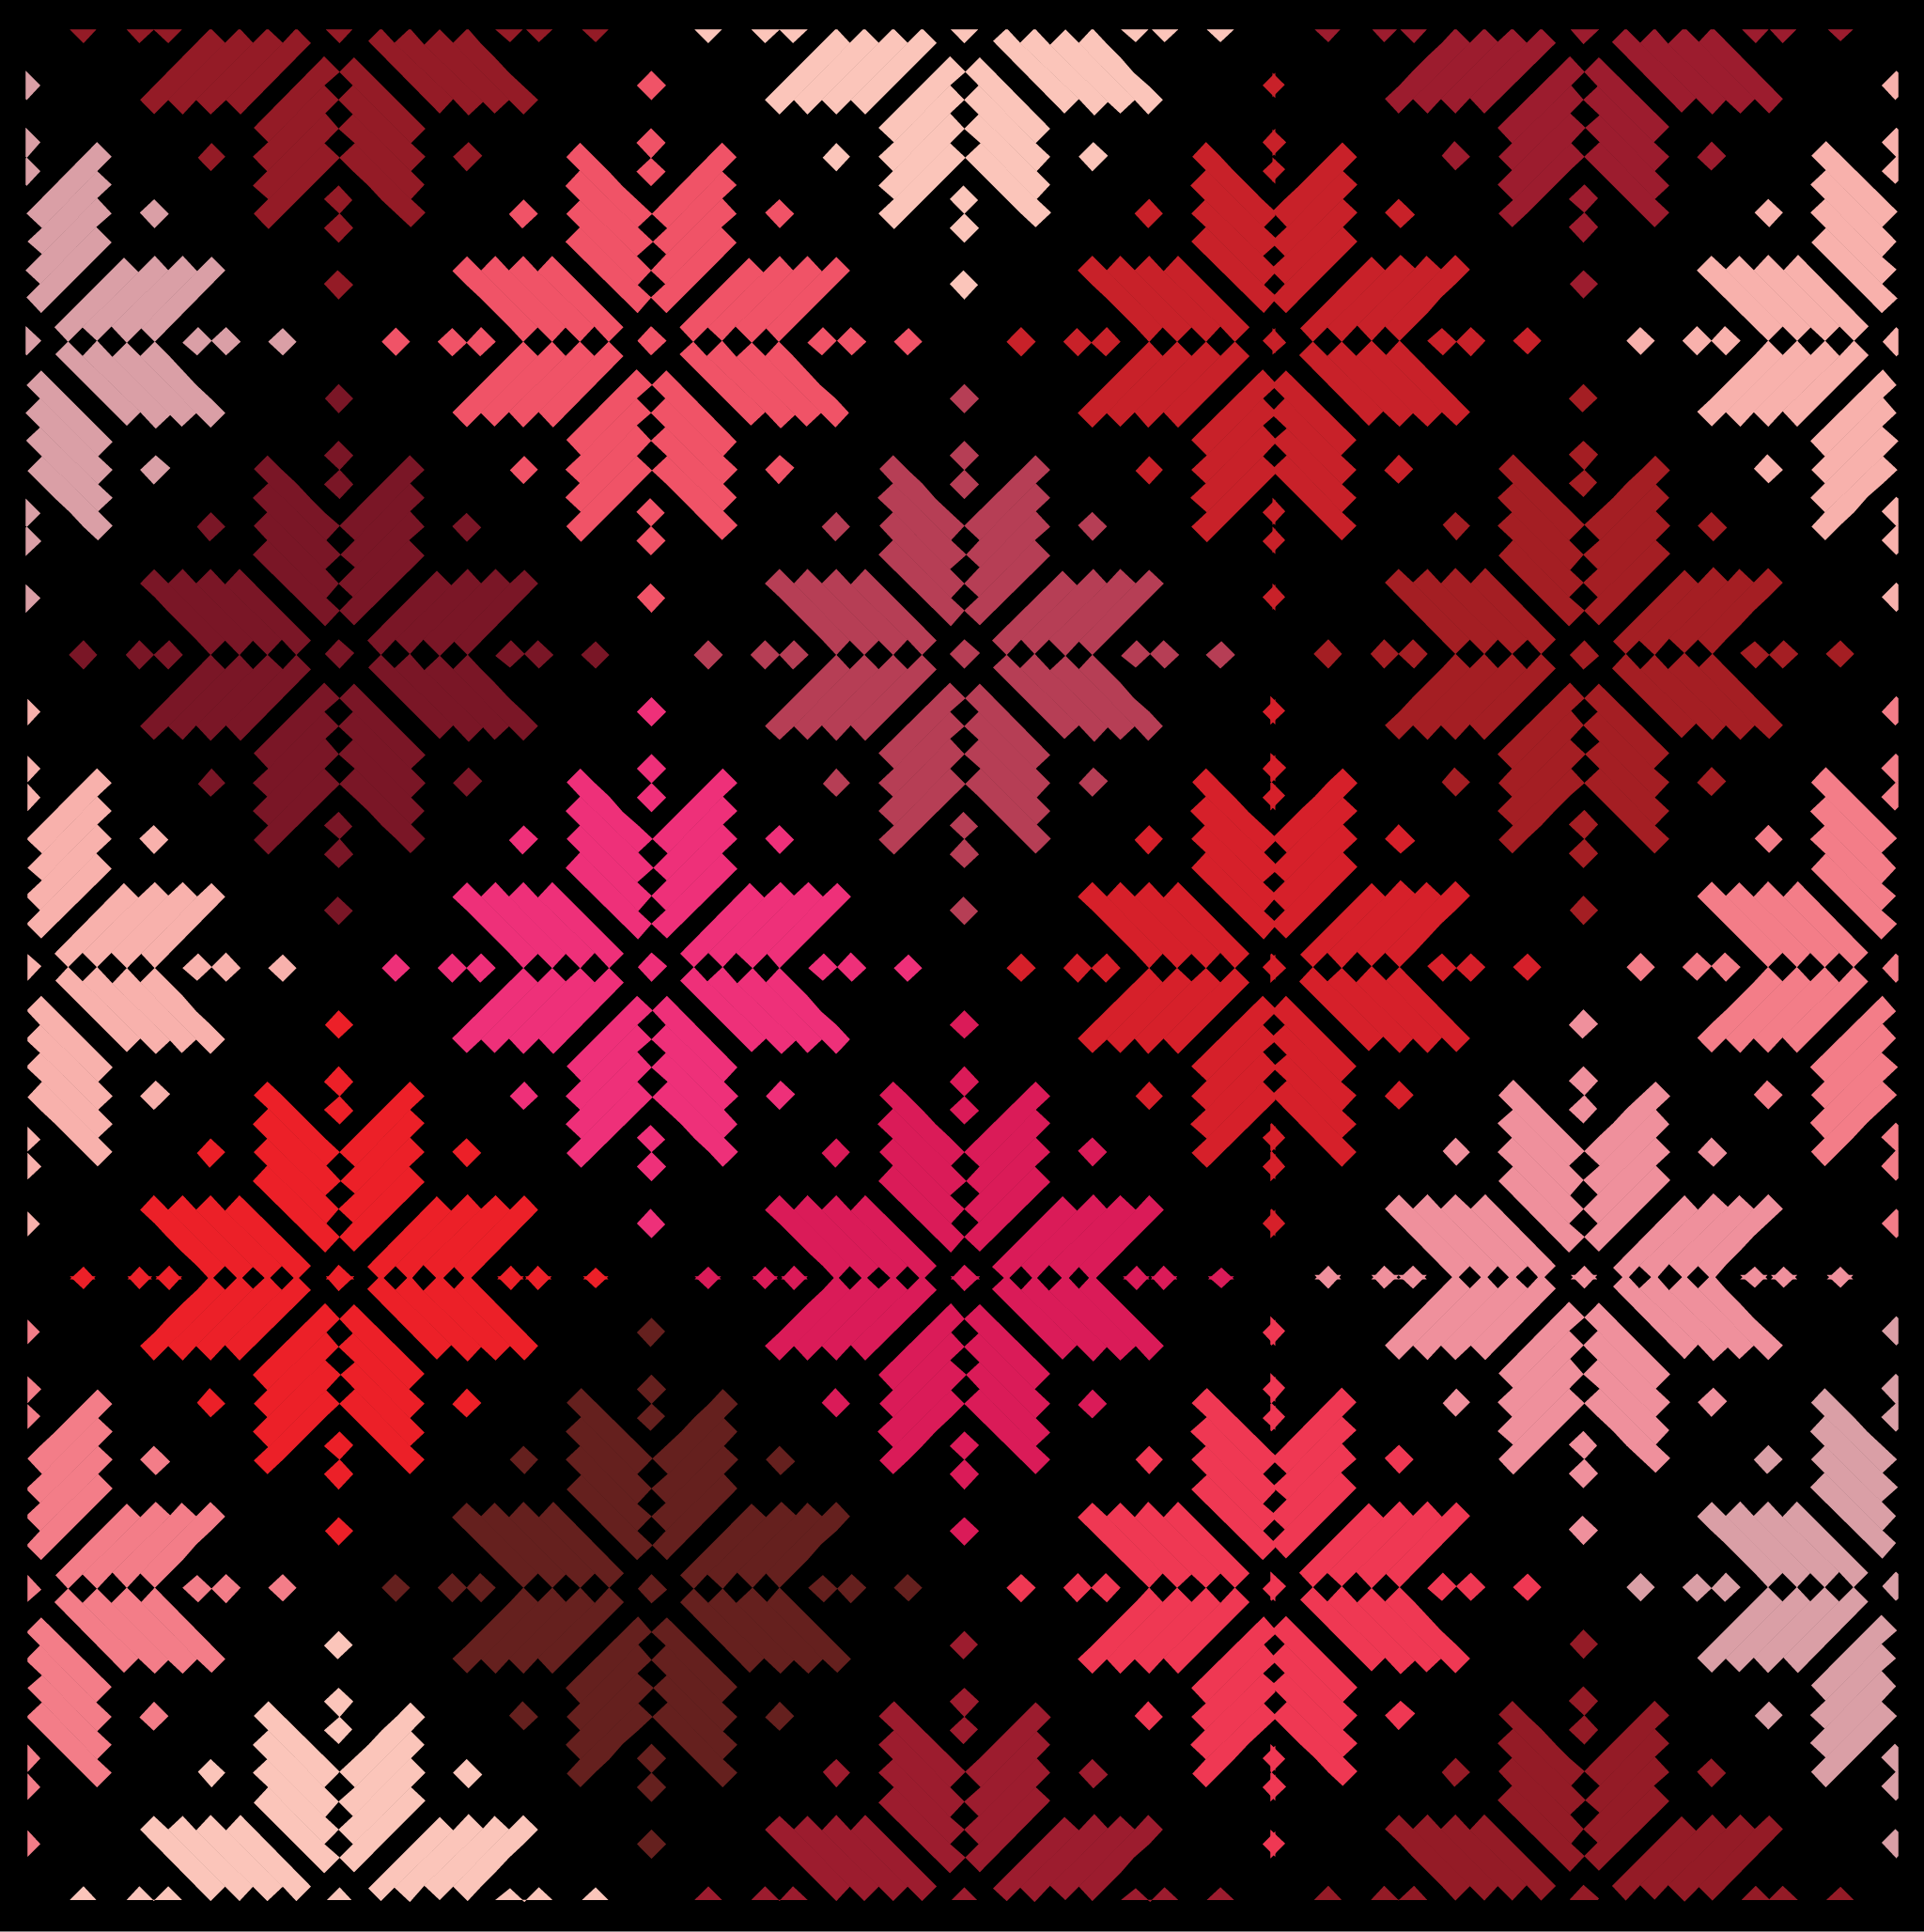 Knitted Star quilt mockup in red and magenta and black - Sewfinity